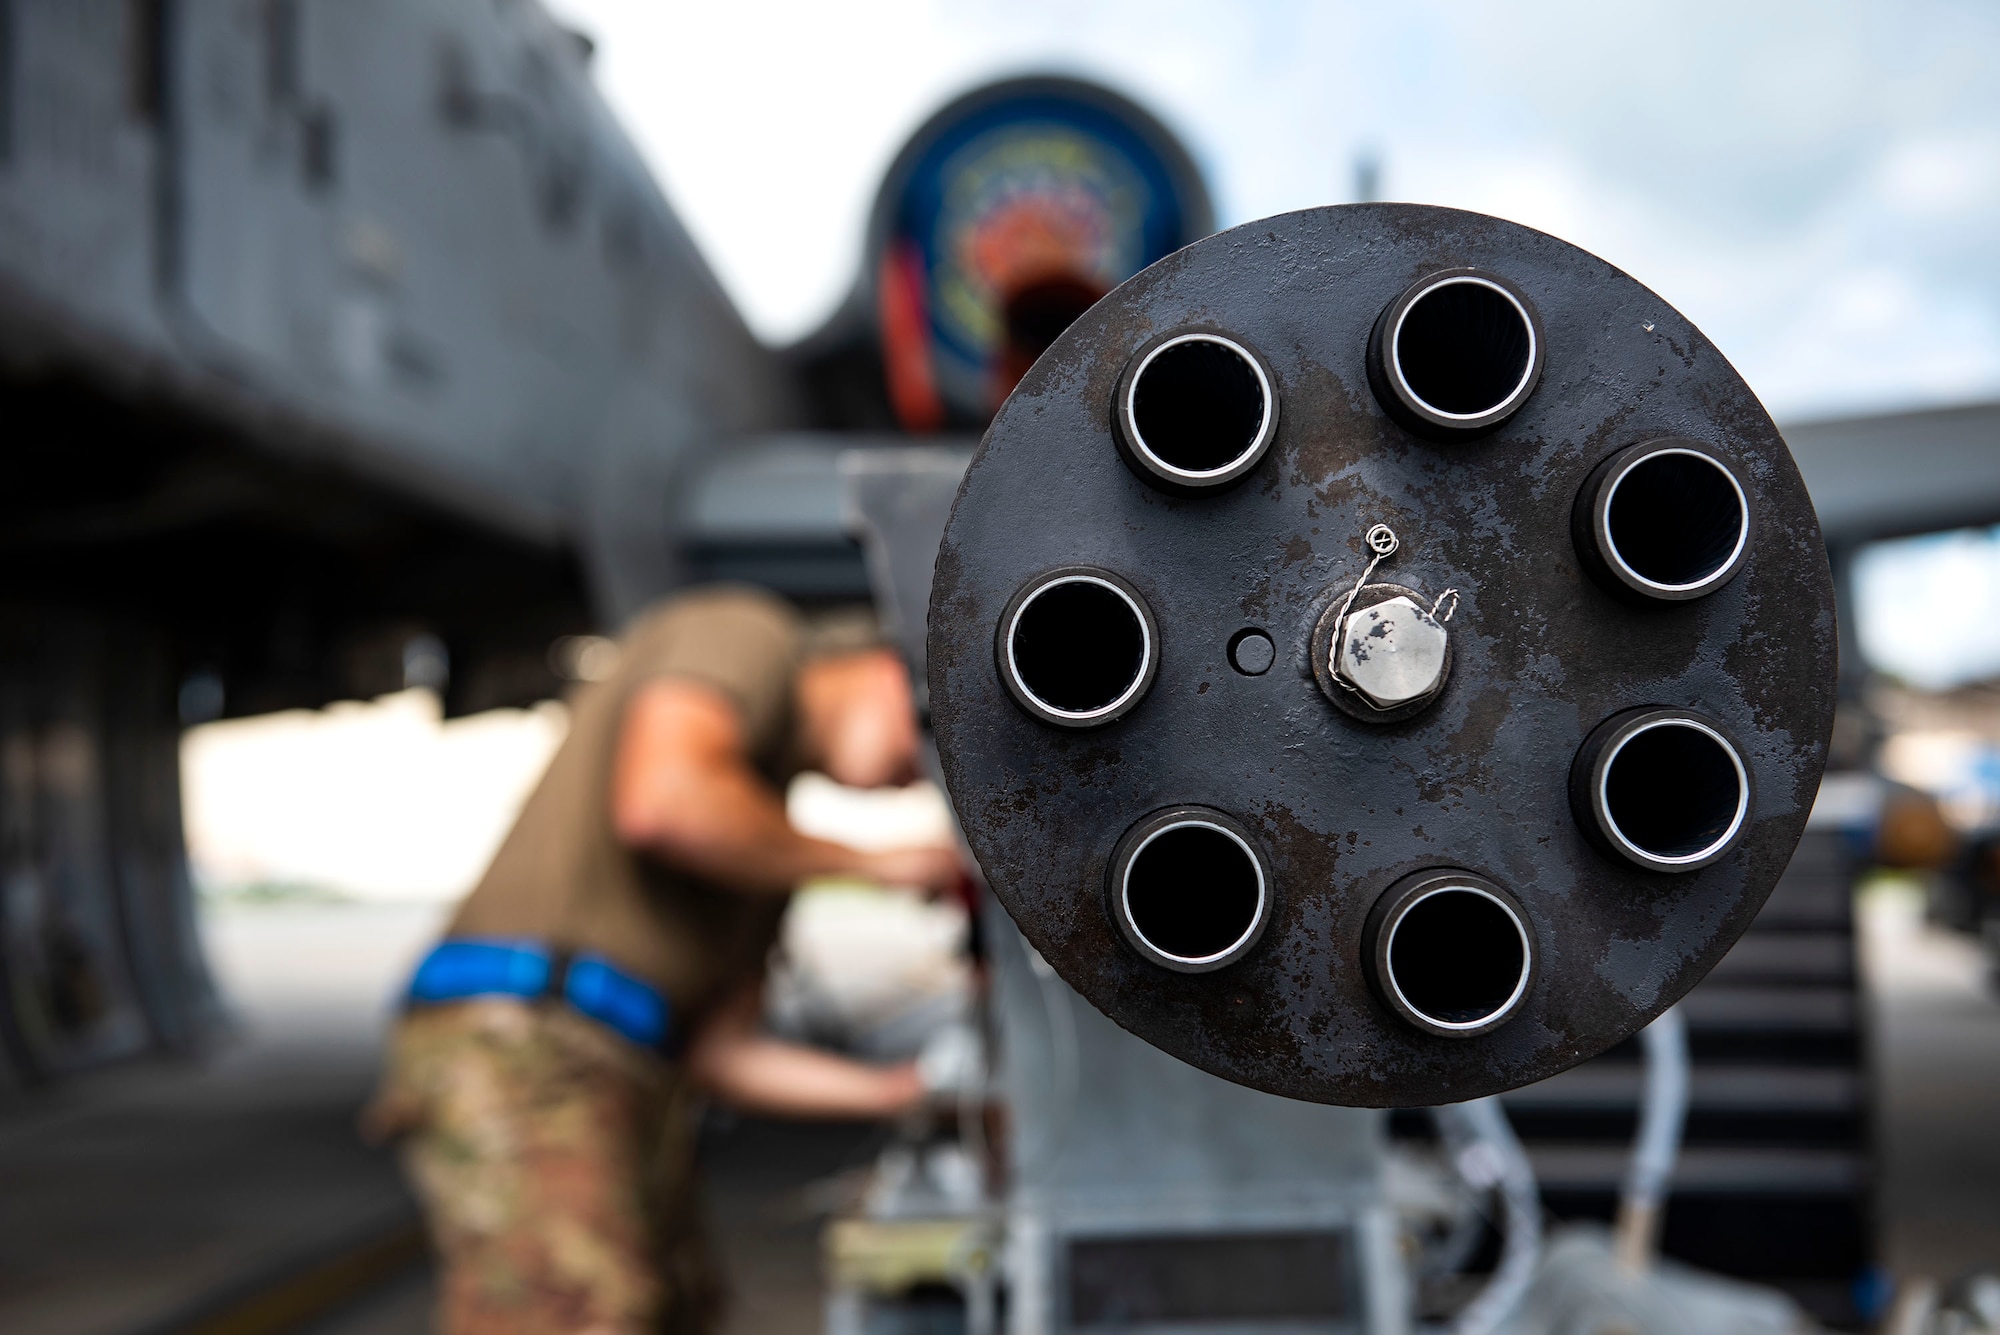 A 30mm GAU-8 Gatling Gun system gets secured during unscheduled maintenance, July 23, 2019, at Moody Air Force Base, Ga. Unscheduled maintenance occurs when discrepancies are discovered with A-10C Thunderbolt II weapon systems. These repairs aid in reducing down time of the aircraft and supporting sustained operations tempo. (U.S. Air Force photo by Senior Airman Erick Requadt)